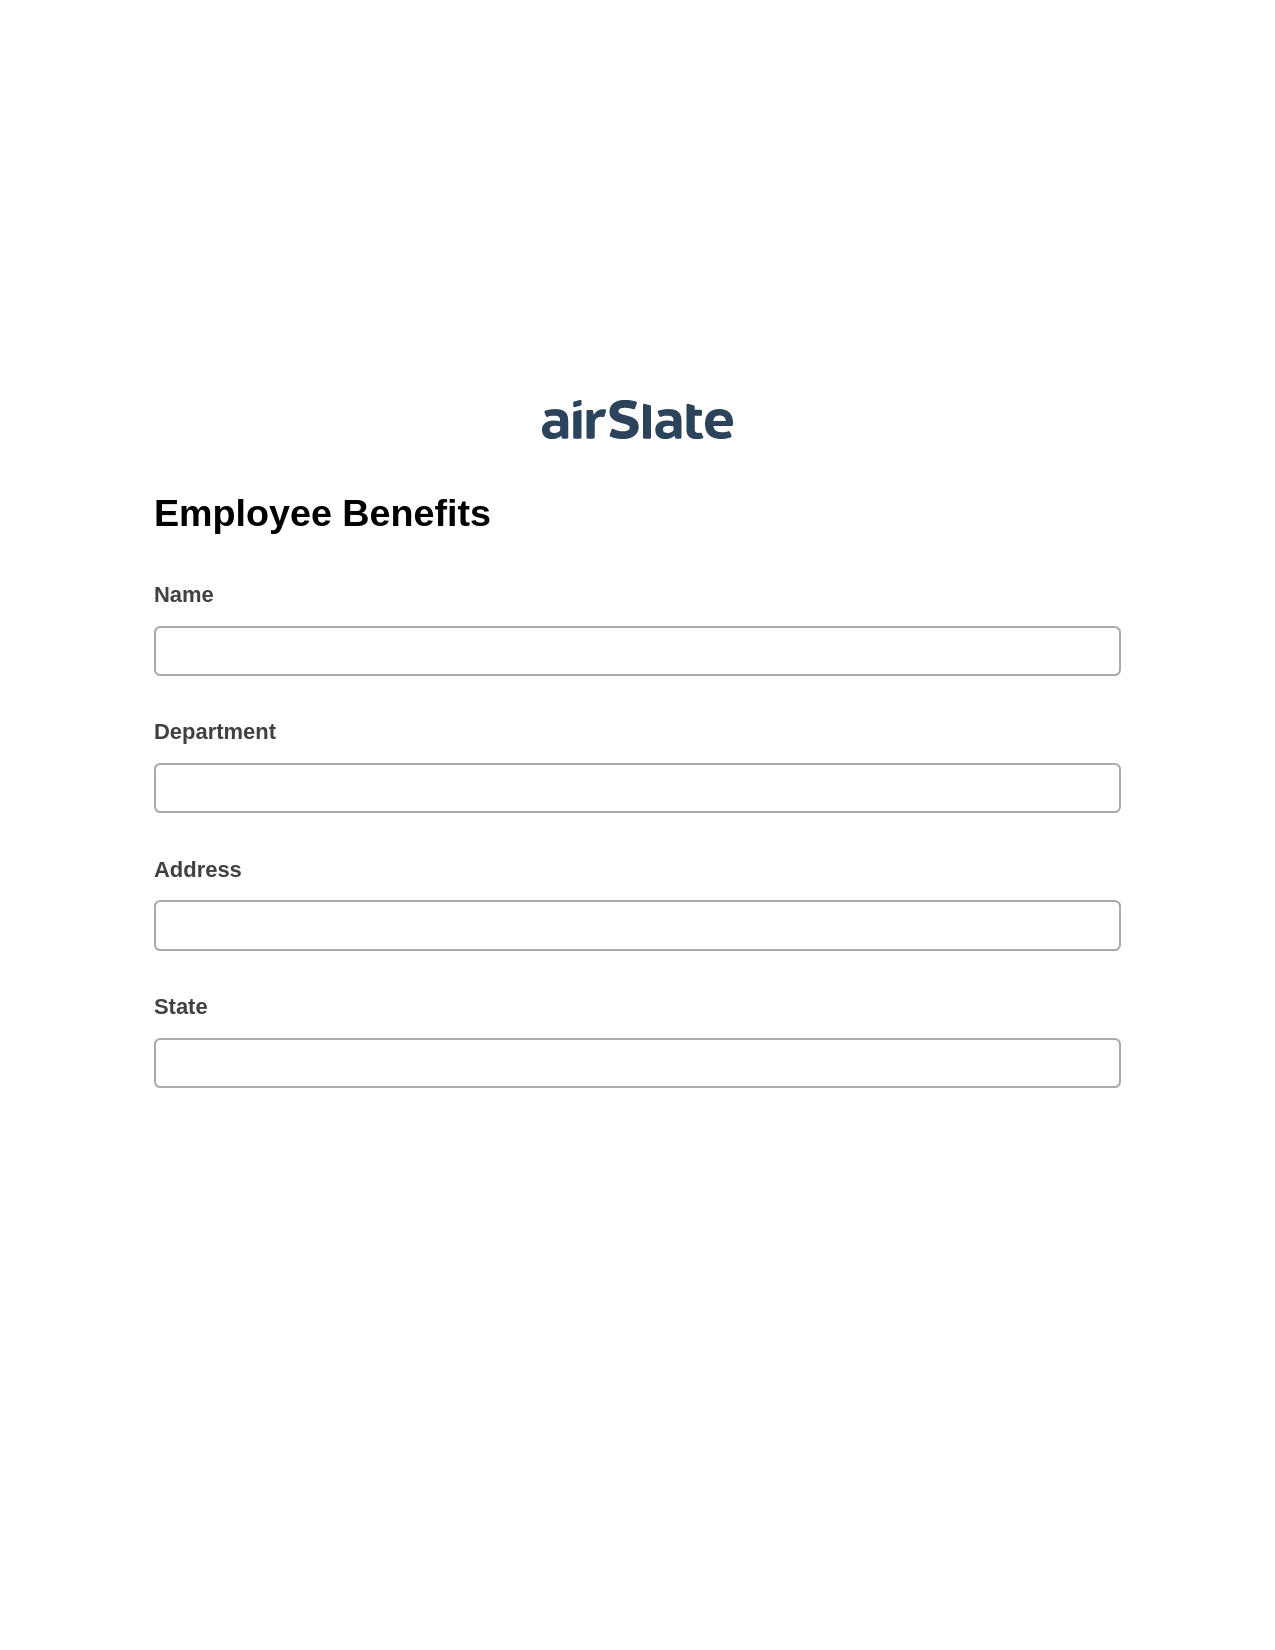 Employee Benefits Pre-fill from CSV File Bot, Set Signature Type Bot, Archive to SharePoint Folder Bot